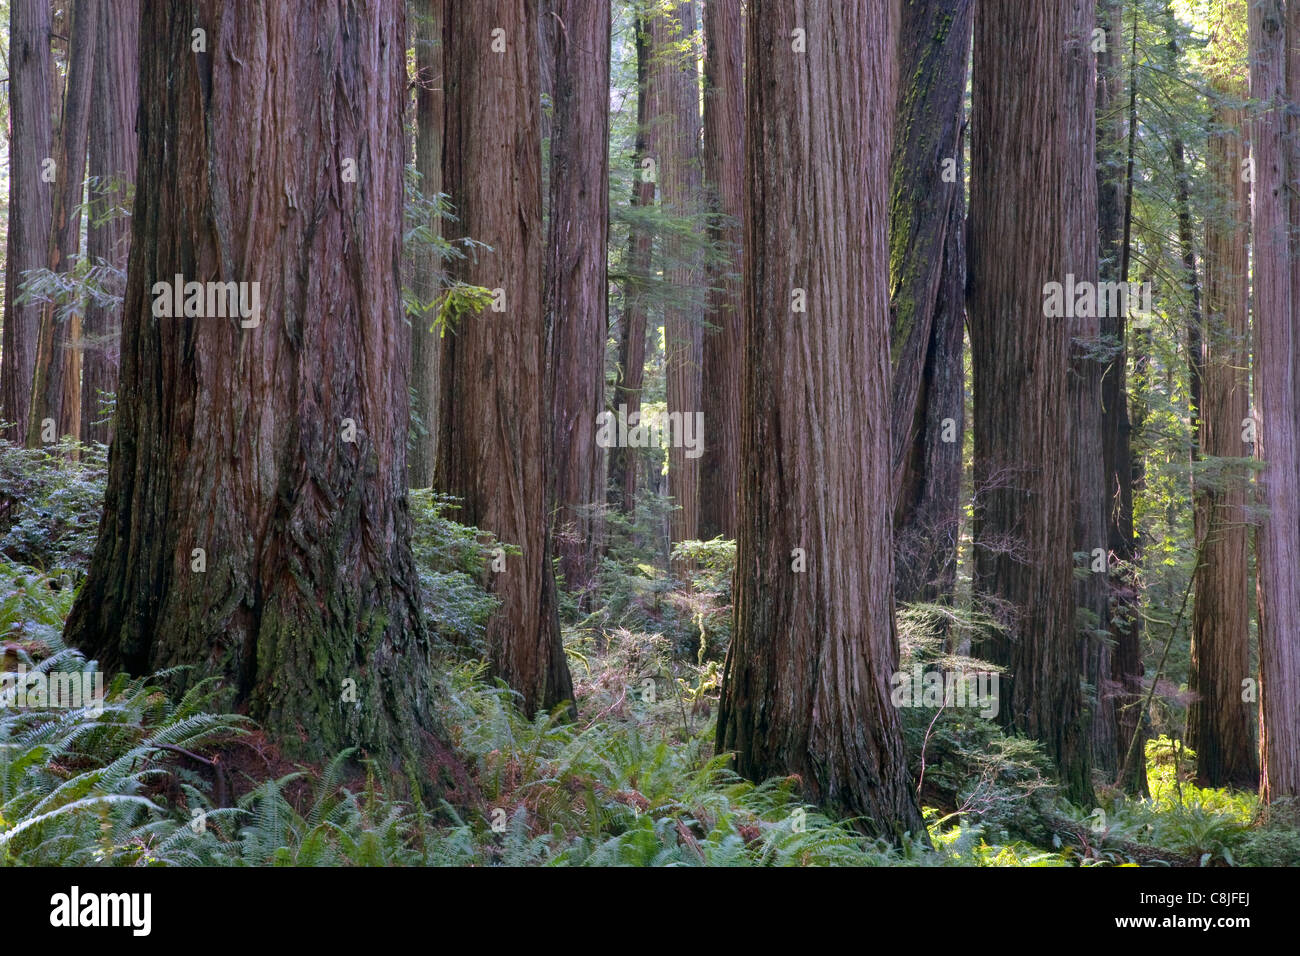 CALIFORNIA - Redwood forest along the Scout Trail in Jedediah Smith Redwoods State Park. Stock Photo